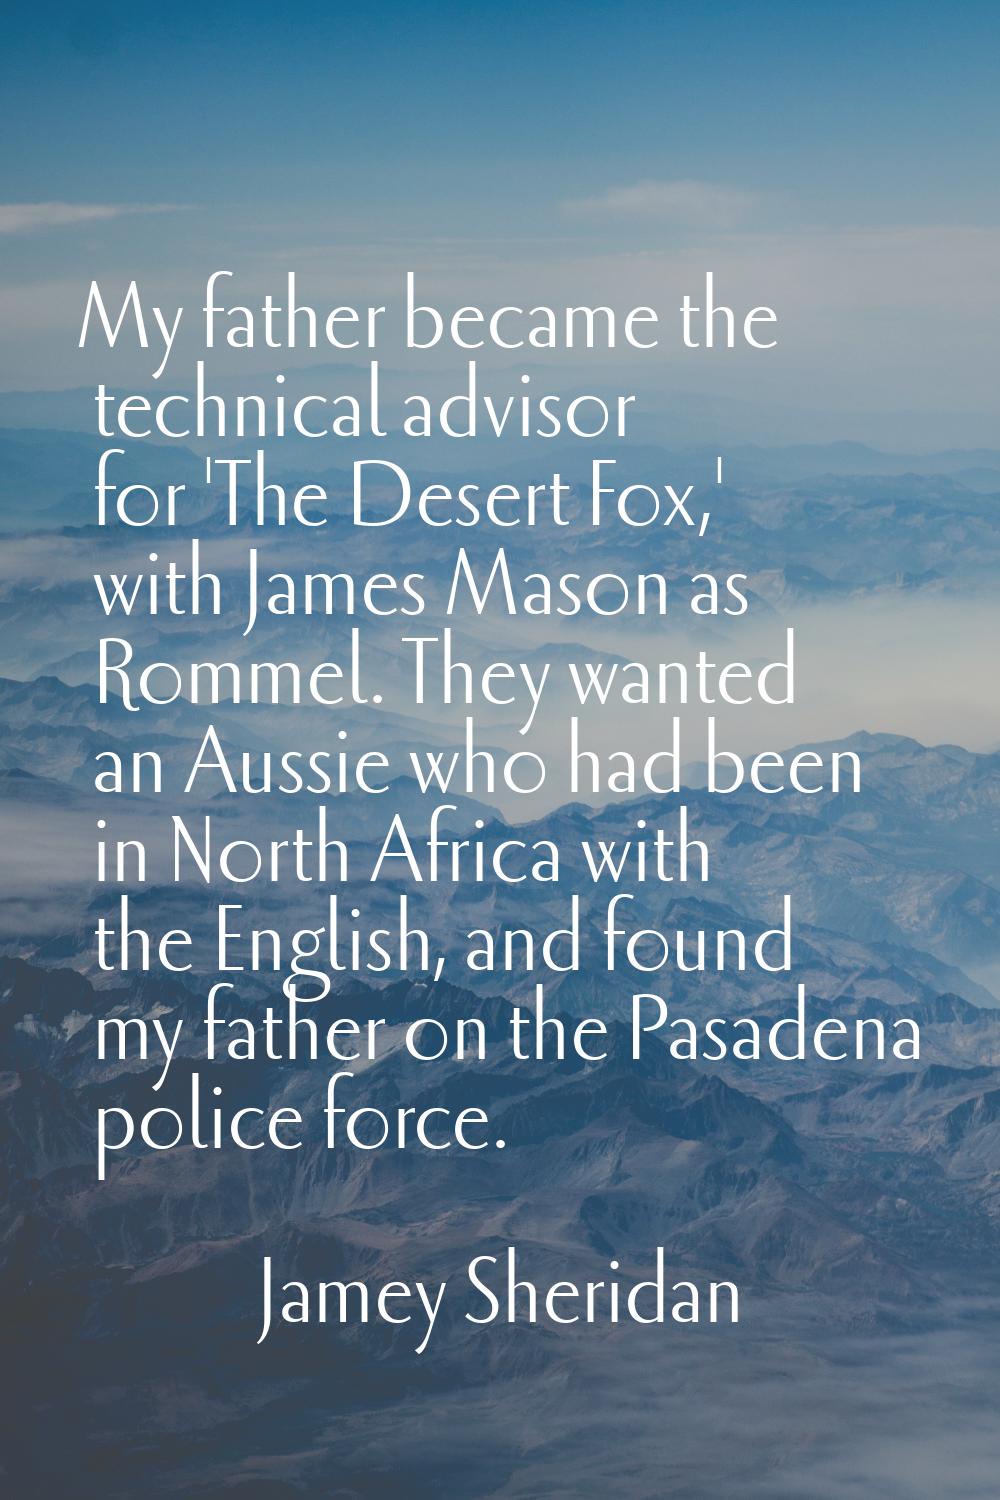 My father became the technical advisor for 'The Desert Fox,' with James Mason as Rommel. They wante